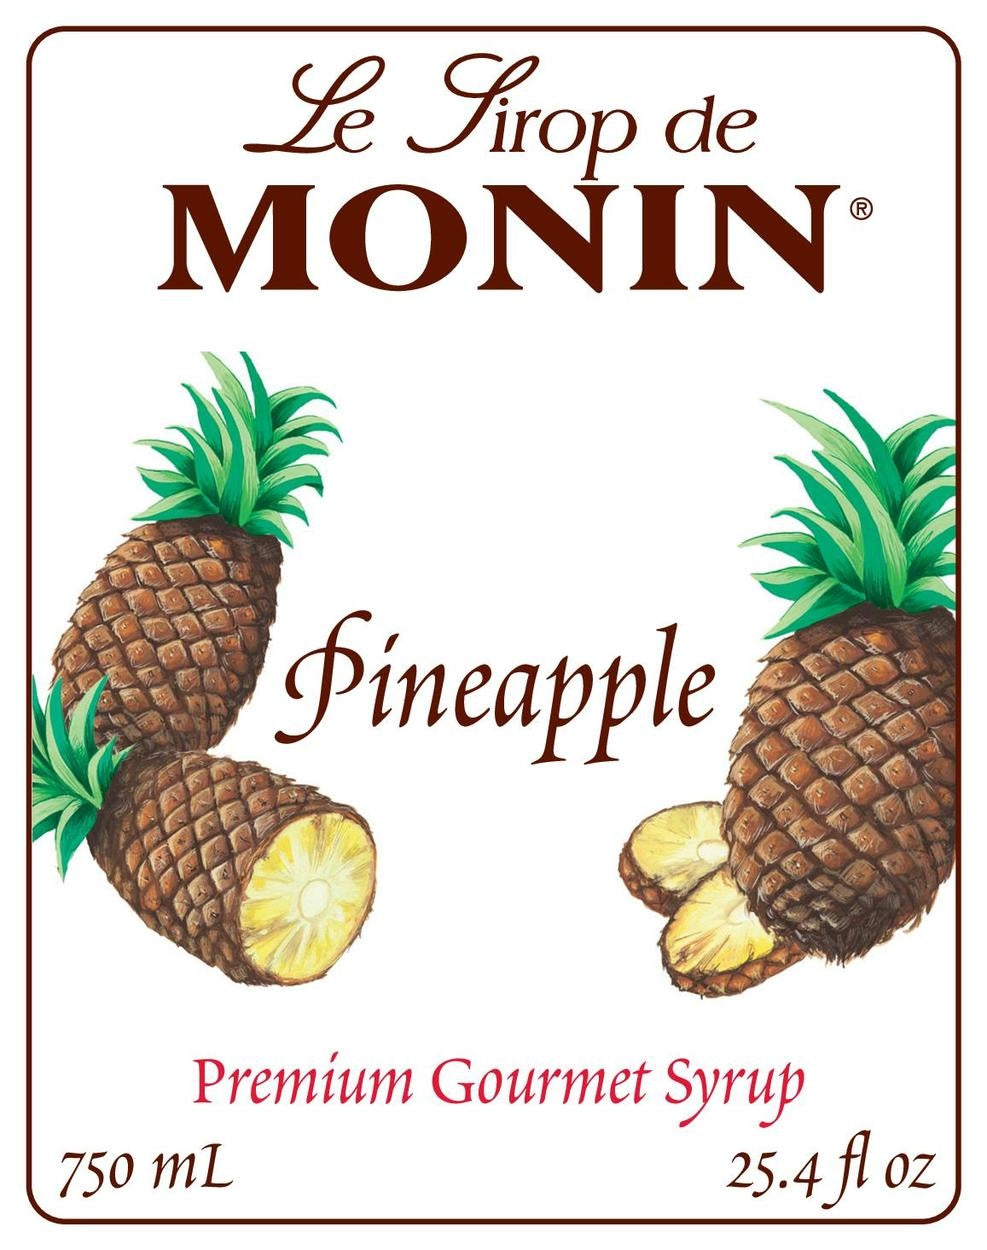 Canadian Monin Distributor - Pineapple - Monin Canada - Premium Syrups and Flavourings - 4 x 1 L per case